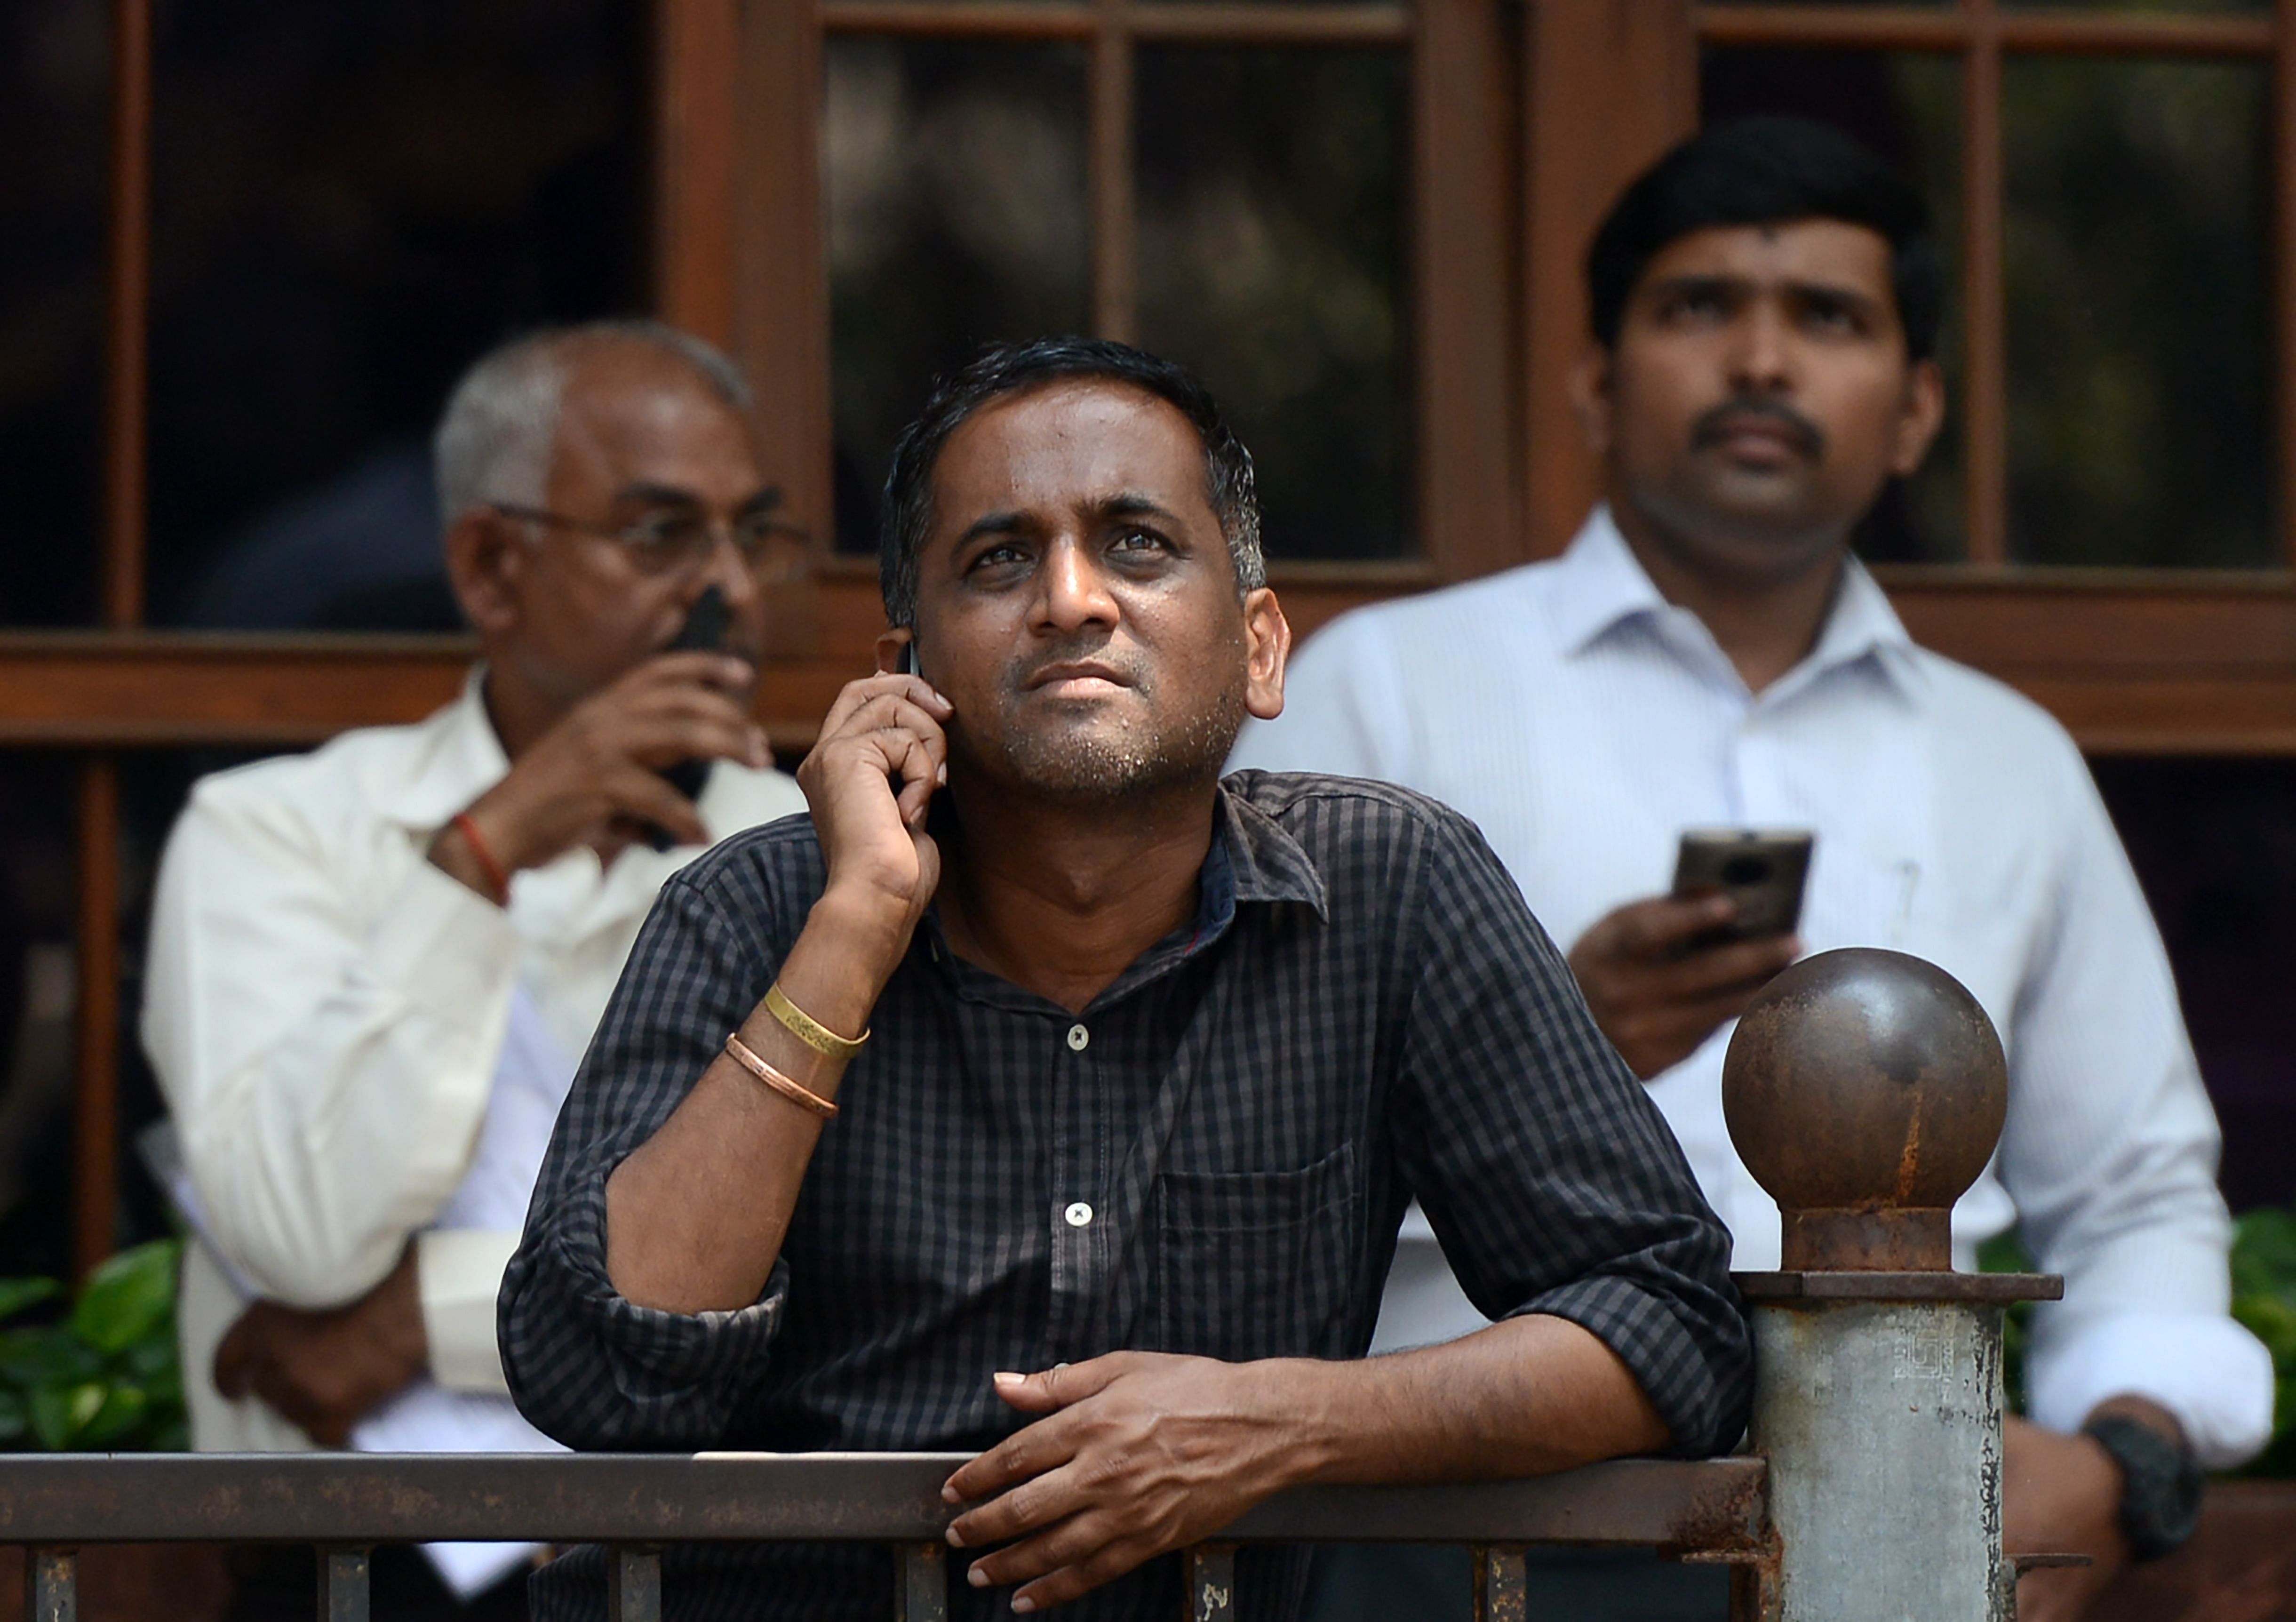 Indian men watch share prices on a digital broadcast outside the Bombay Stock Exchange (BSE) in Mumbai. (AFP Photo)